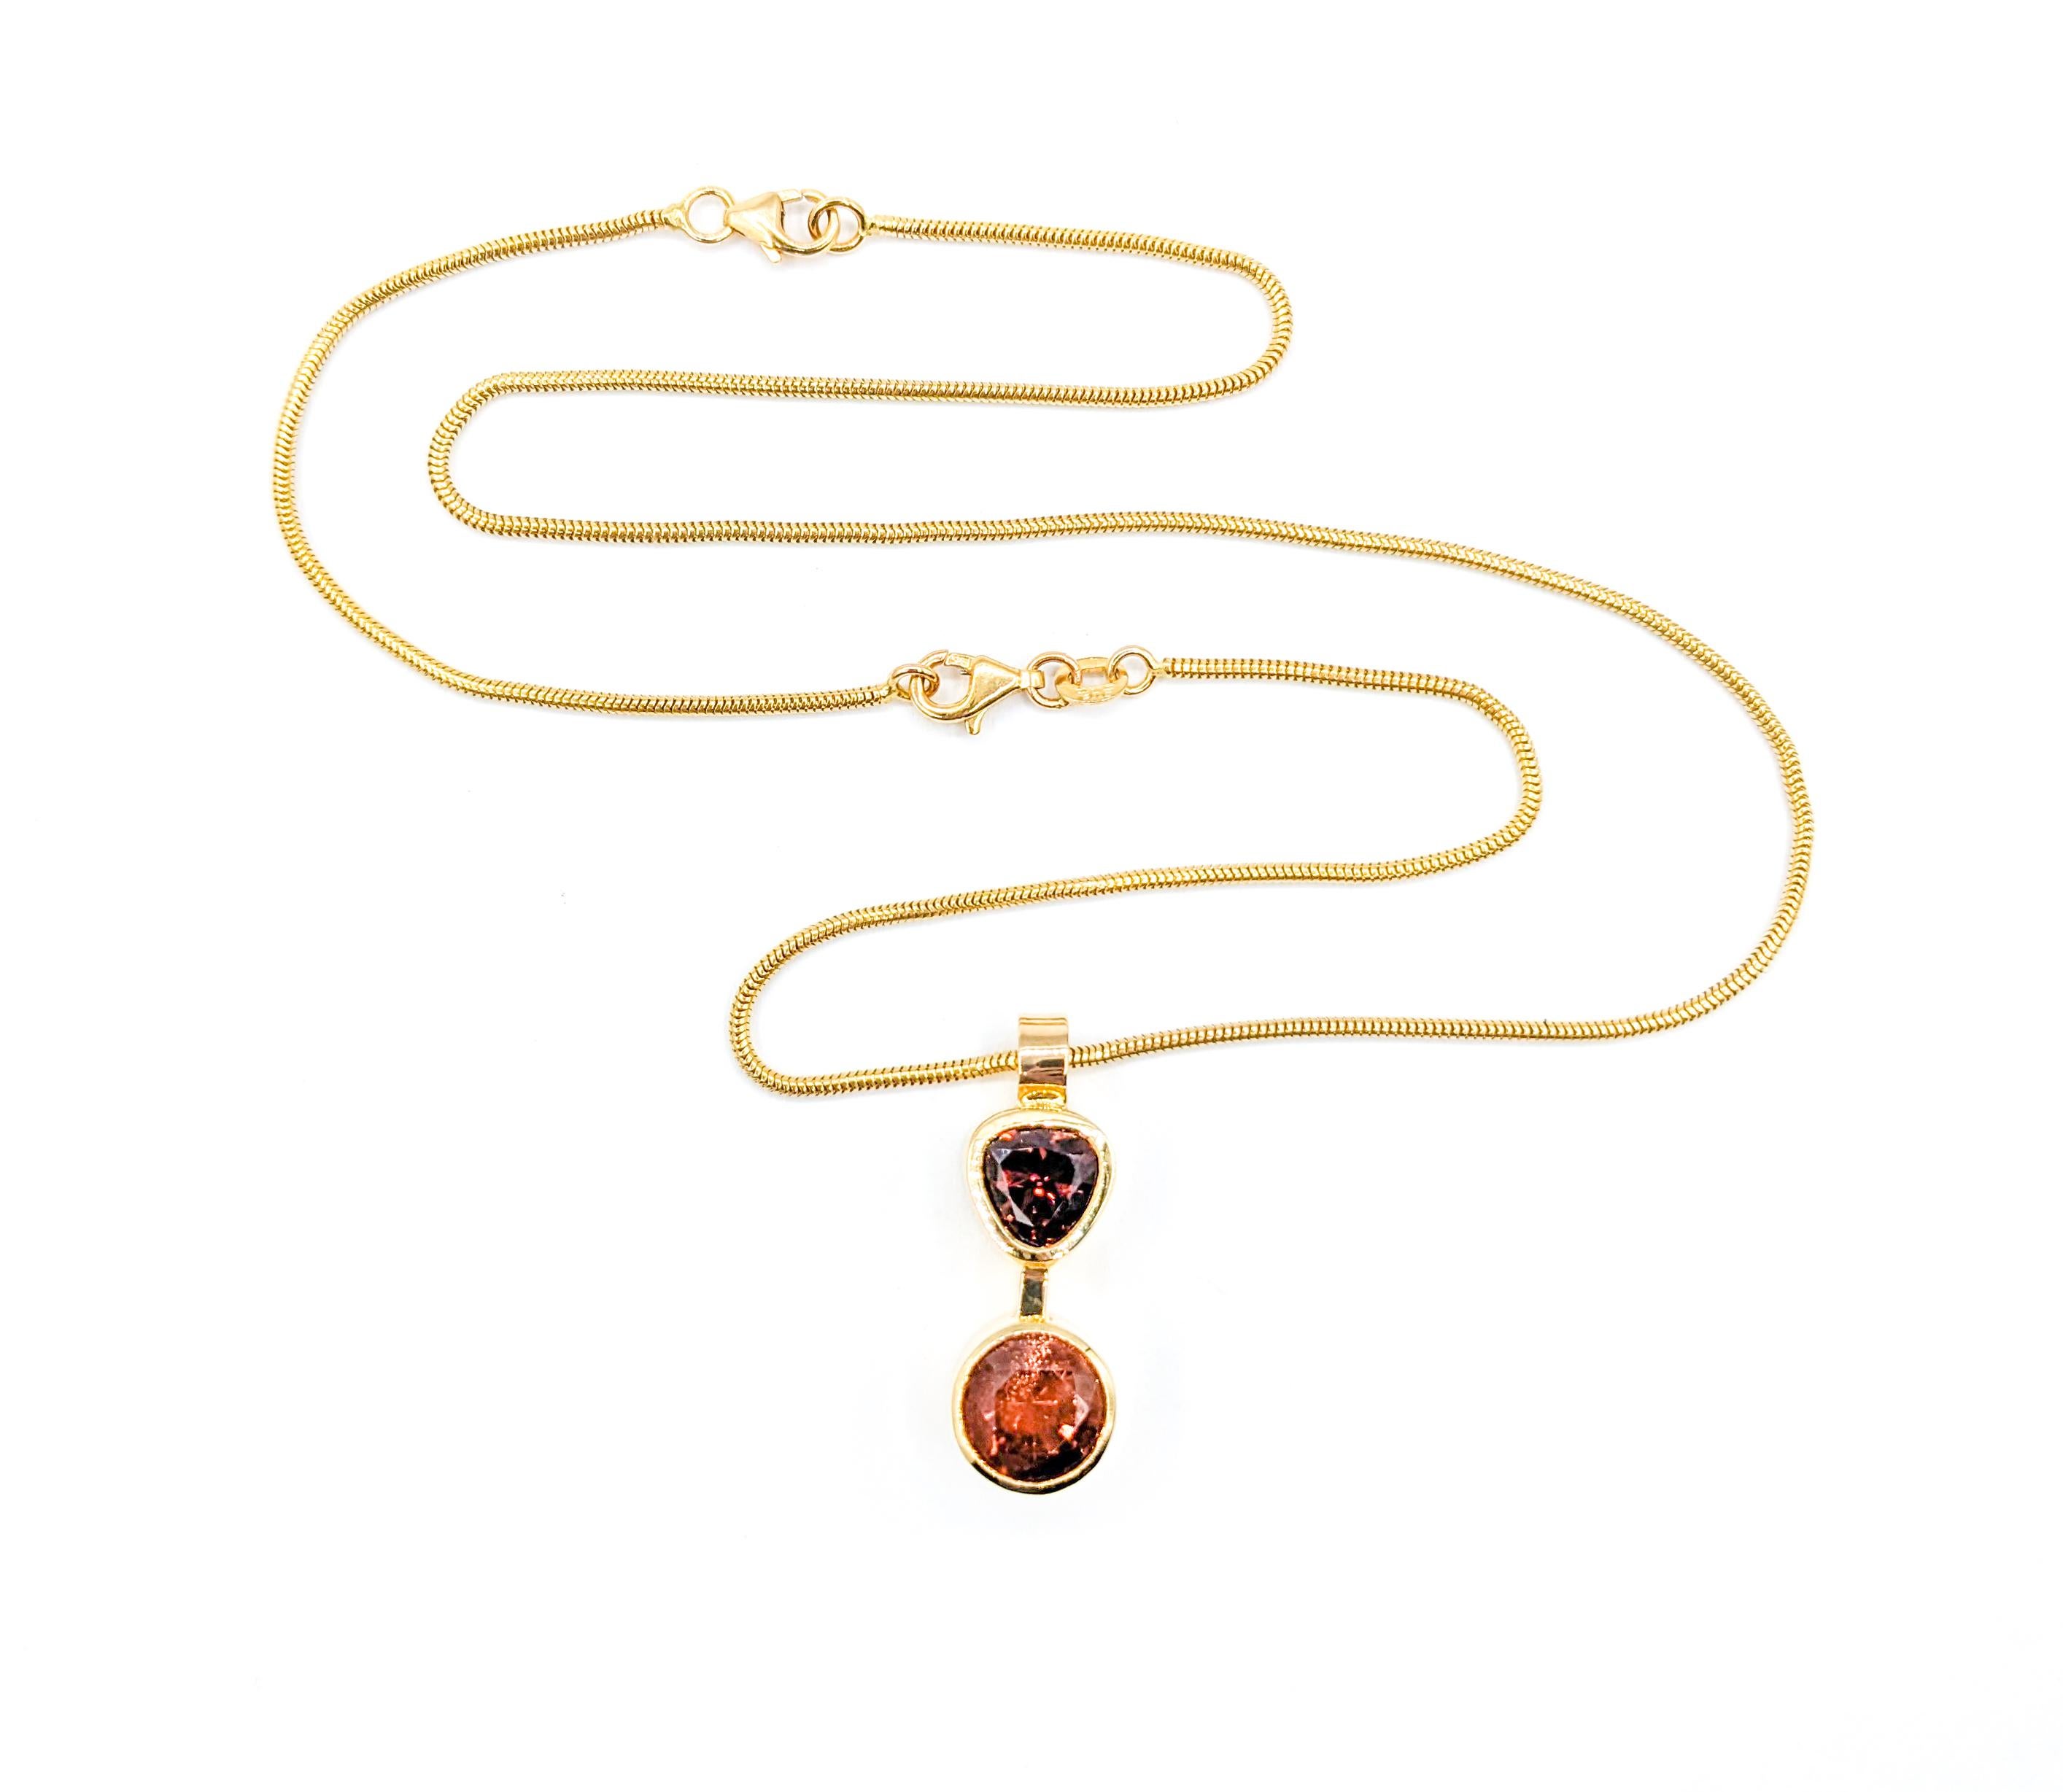 Custom Sunstone & Tourmaline Bezel Pendant Necklace

Unveil elegance with our meticulously designed pendant Sunstone and Tourmaline necklace, handcrafted in the lustrous 14k yellow gold. At its heart lies a mesmerizing 2.5ct round Sunstone, renowned